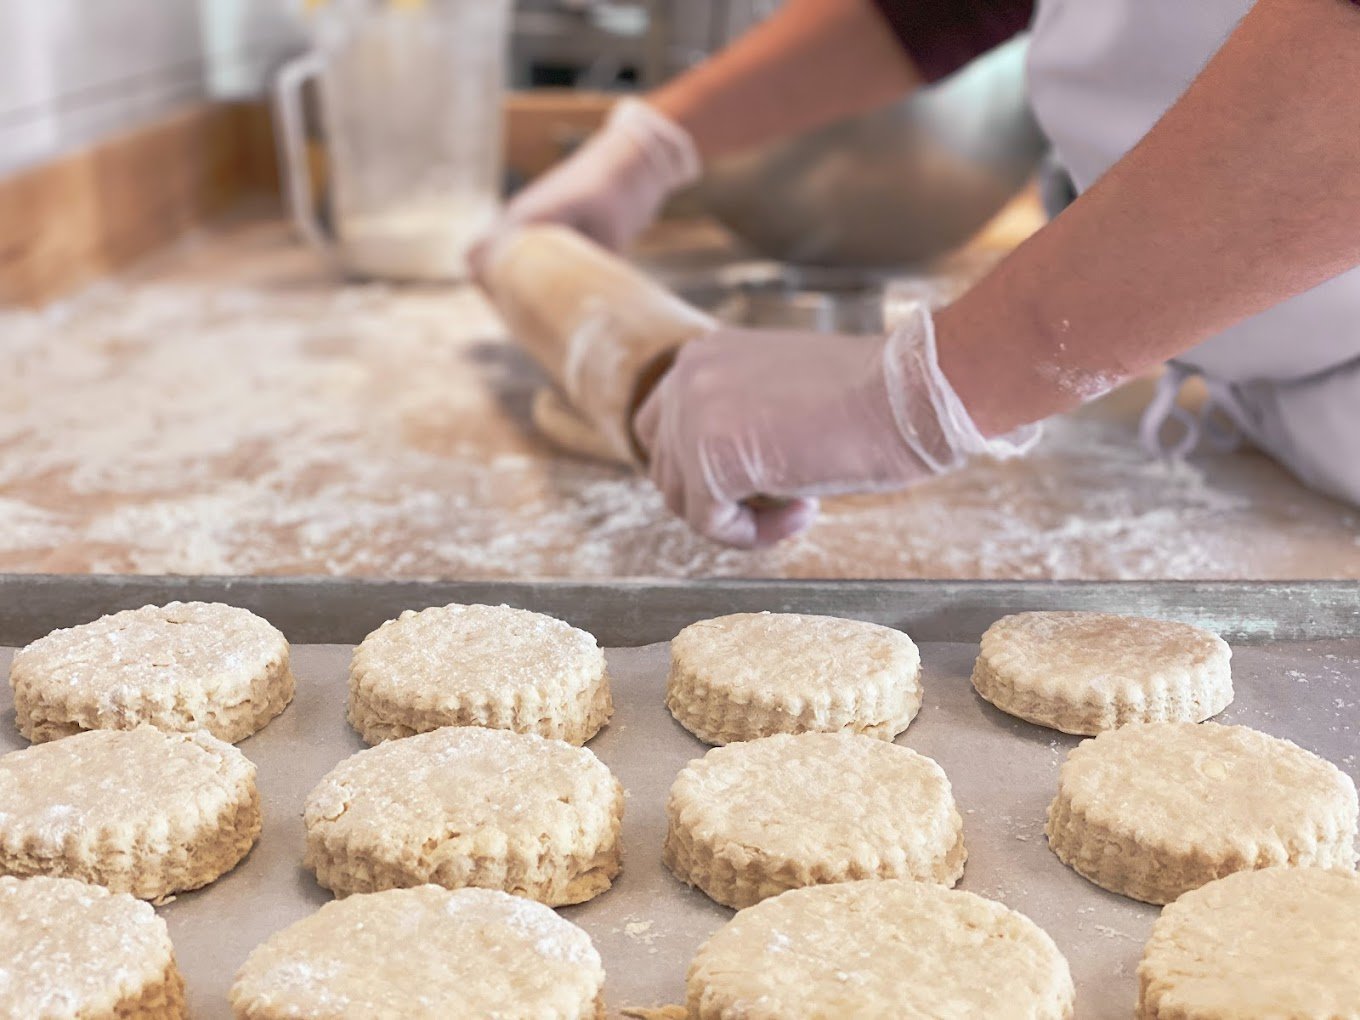 handmade biscuits being cut